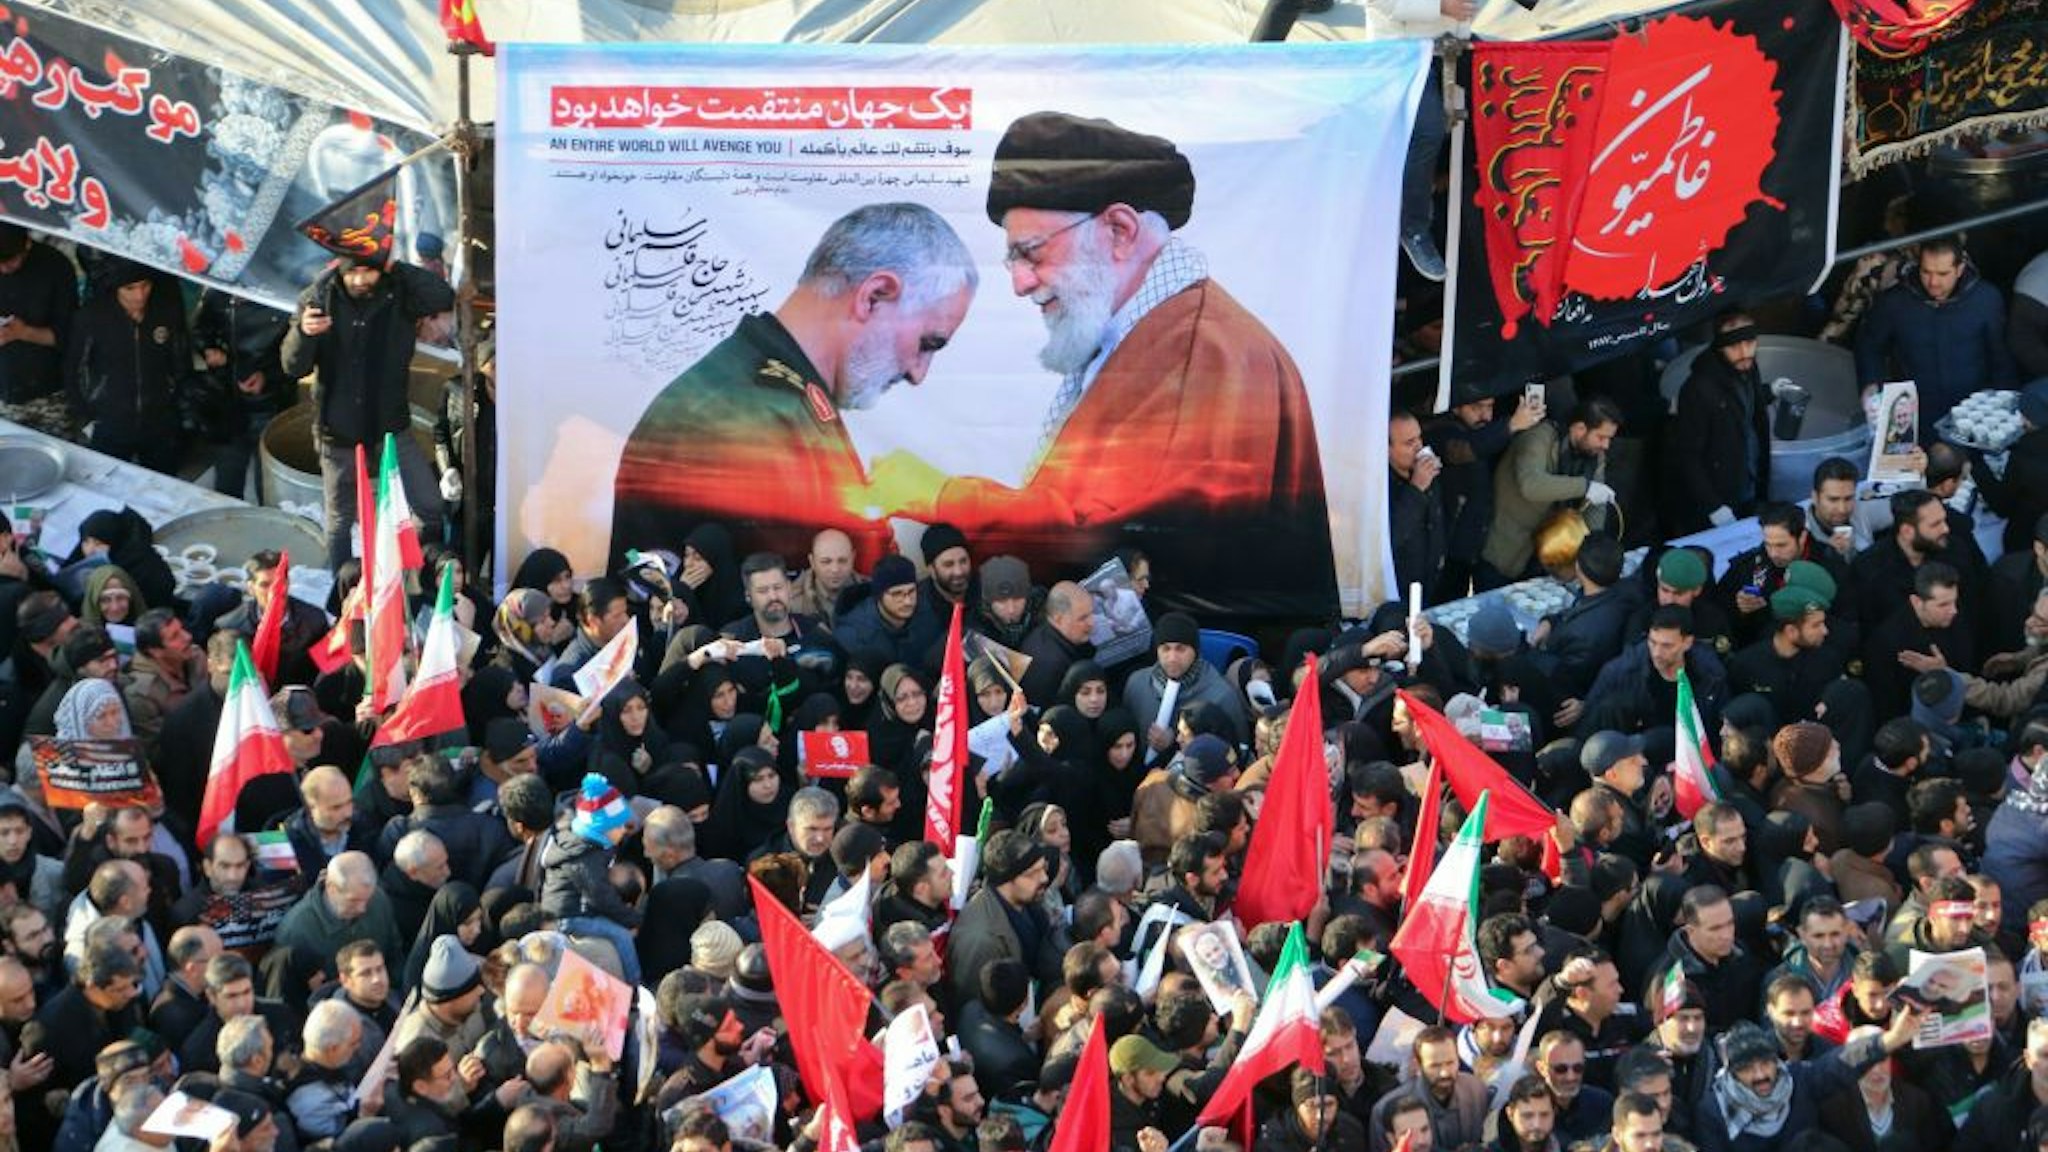 Iranian mourners carry a picture of Iran's Supreme Leader Ayatollah Ali Khamenei (R) granting the Order of Zolfaghar, the highest military honour of Iran, to General Qasem Soleimani, during the latter's funeral procession in the capital Tehran on January 6, 2020. - Downtown Tehran was brought to a standstill as mourners flooded the Iranian capital to pay an emotional homage to Soleimani, the "heroic" general who spearheaded Iran's Middle East operations as commander of the Revolutionary Guards' Quds Force and was killed in a US drone strike on January 3 near Baghdad airport along with Iraqi paramilitary chief Abu Mahdi al-Muhandis and others.